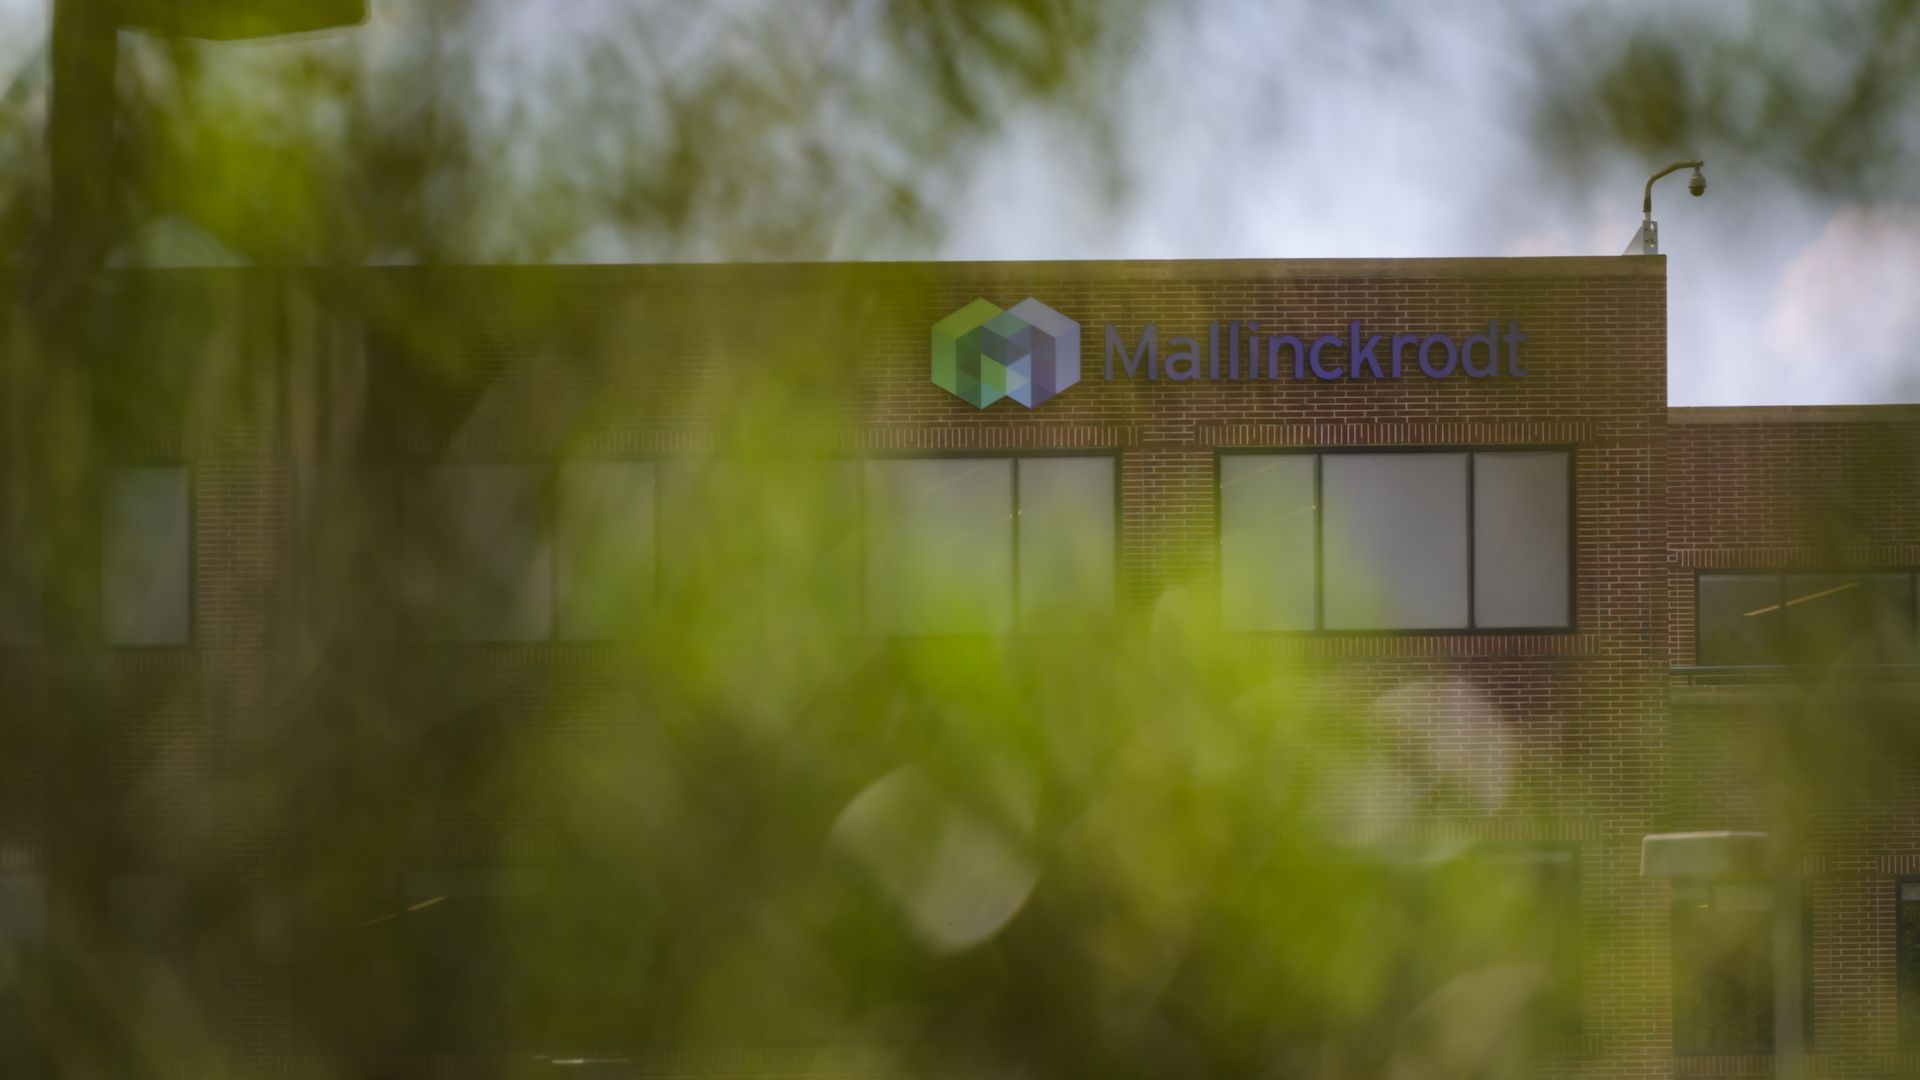 Mallinckrodt offices in Bedminster, New Jersey